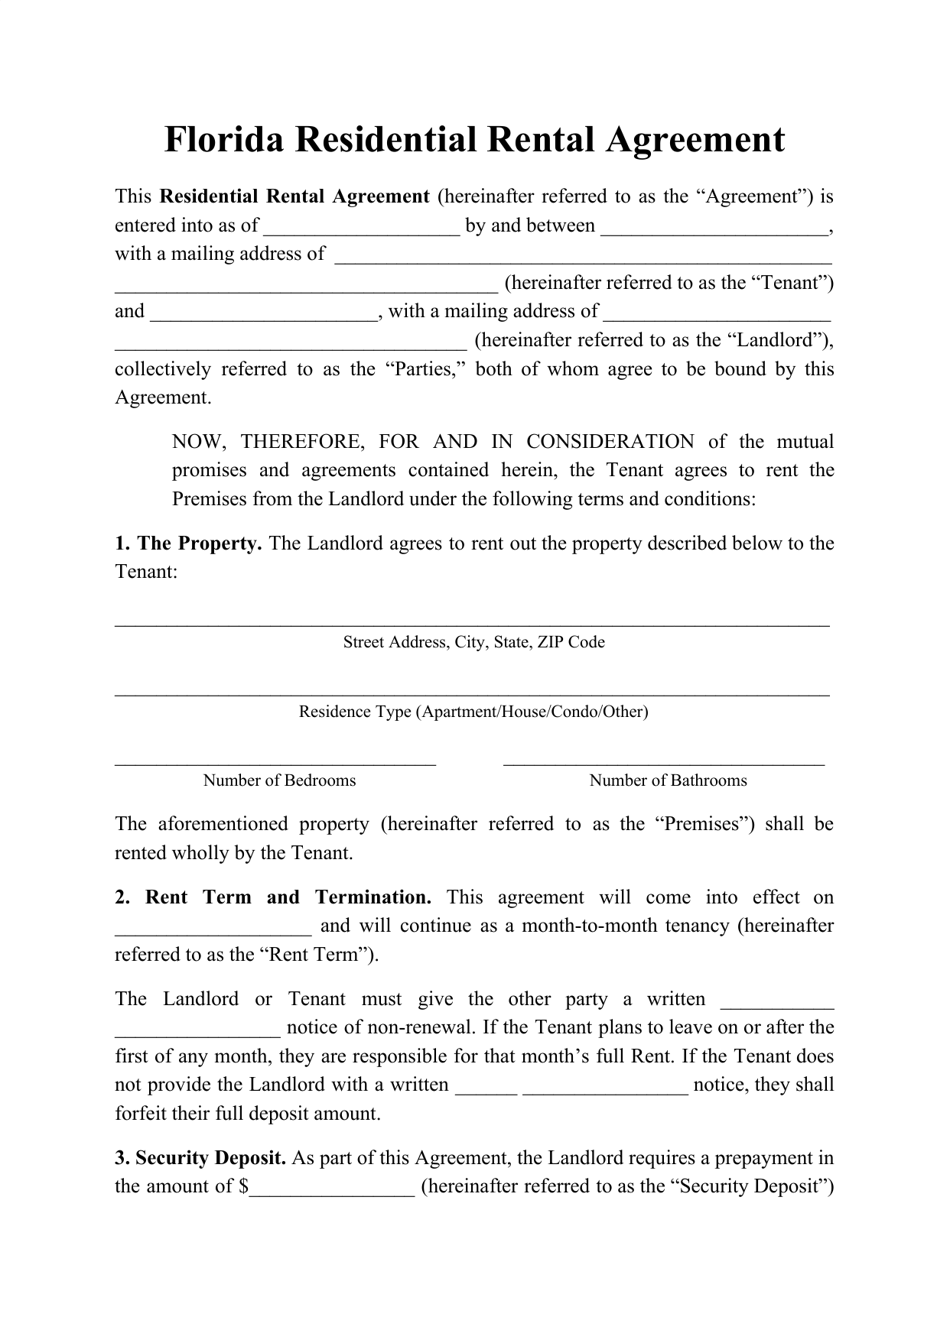 Residential Rental Agreement Template - Florida, Page 1